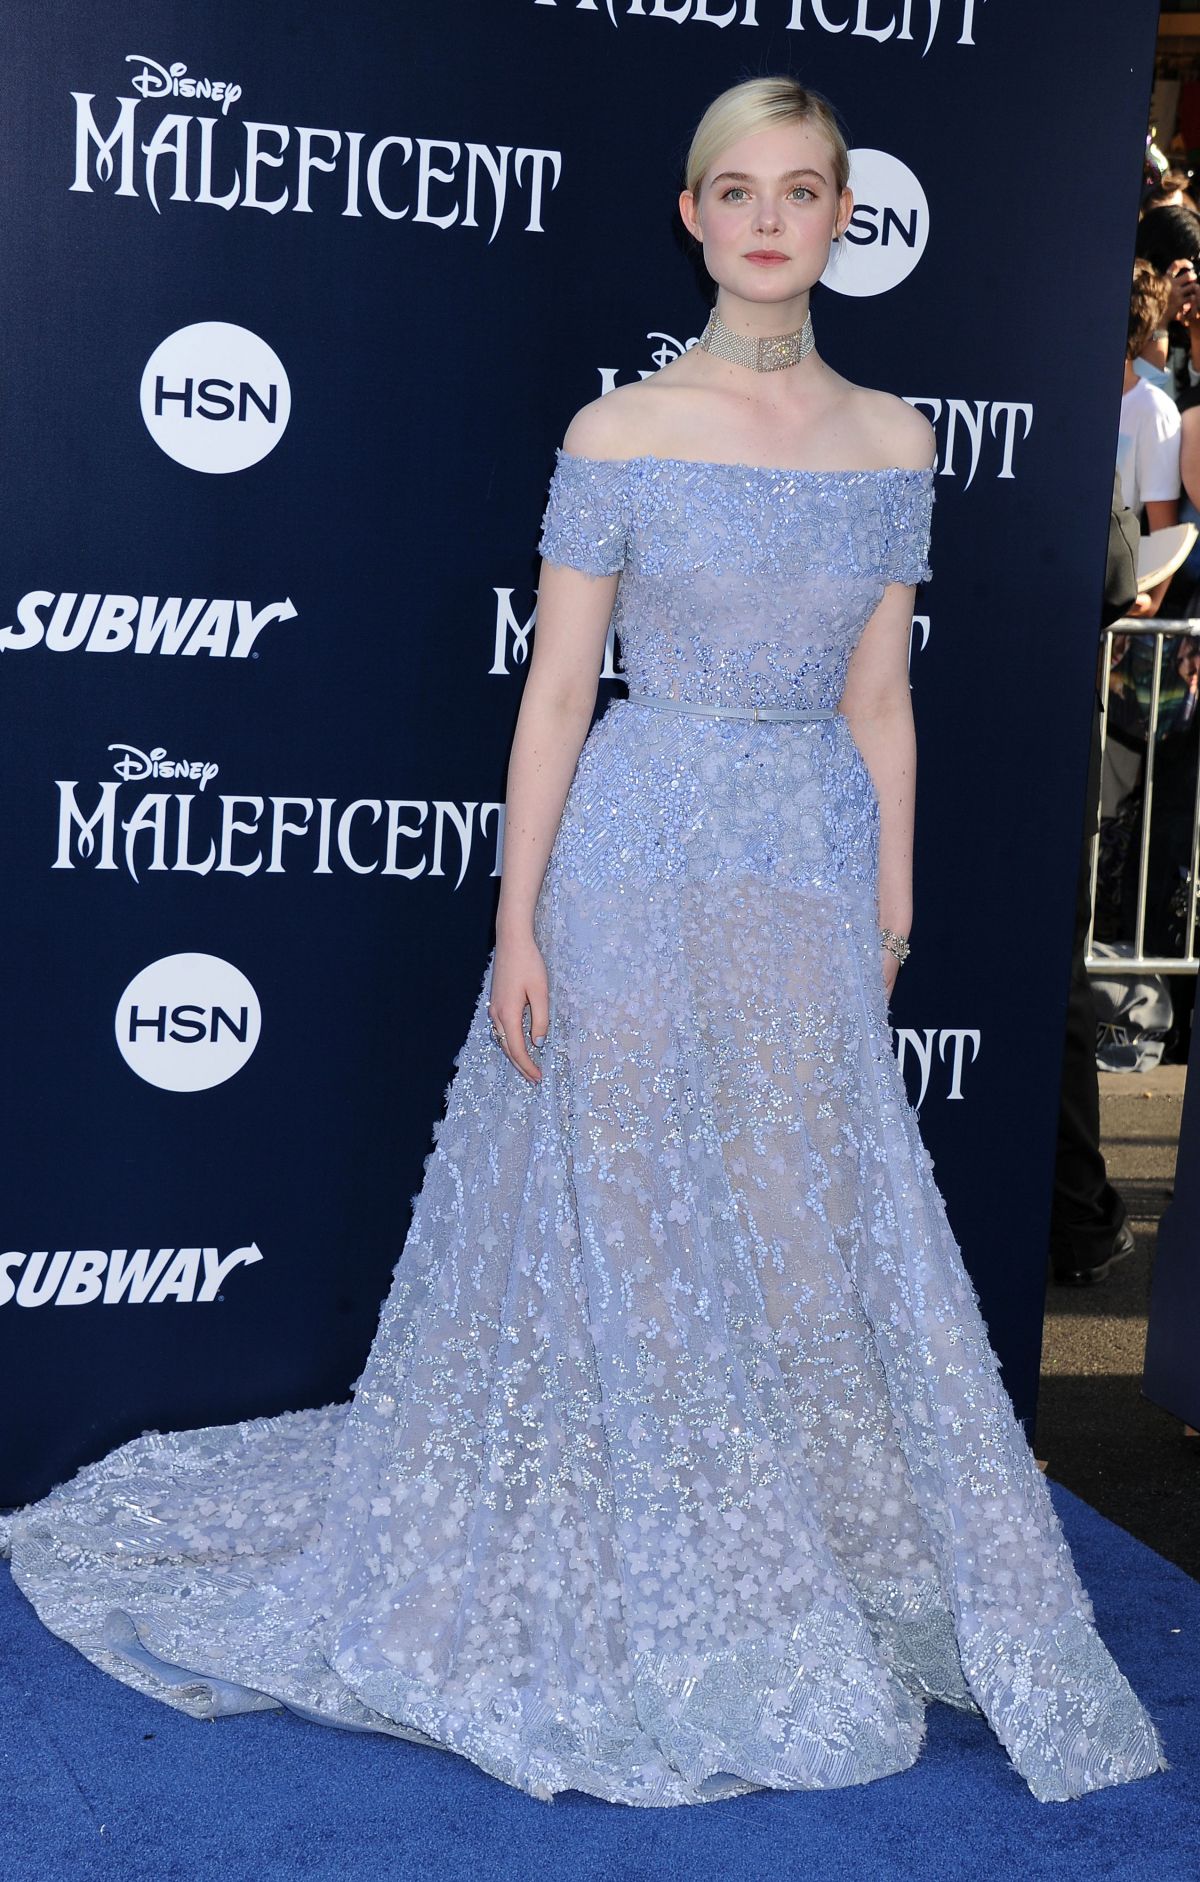 ELLE FANNING at Maleficent Premier in Hollywood – HawtCelebs